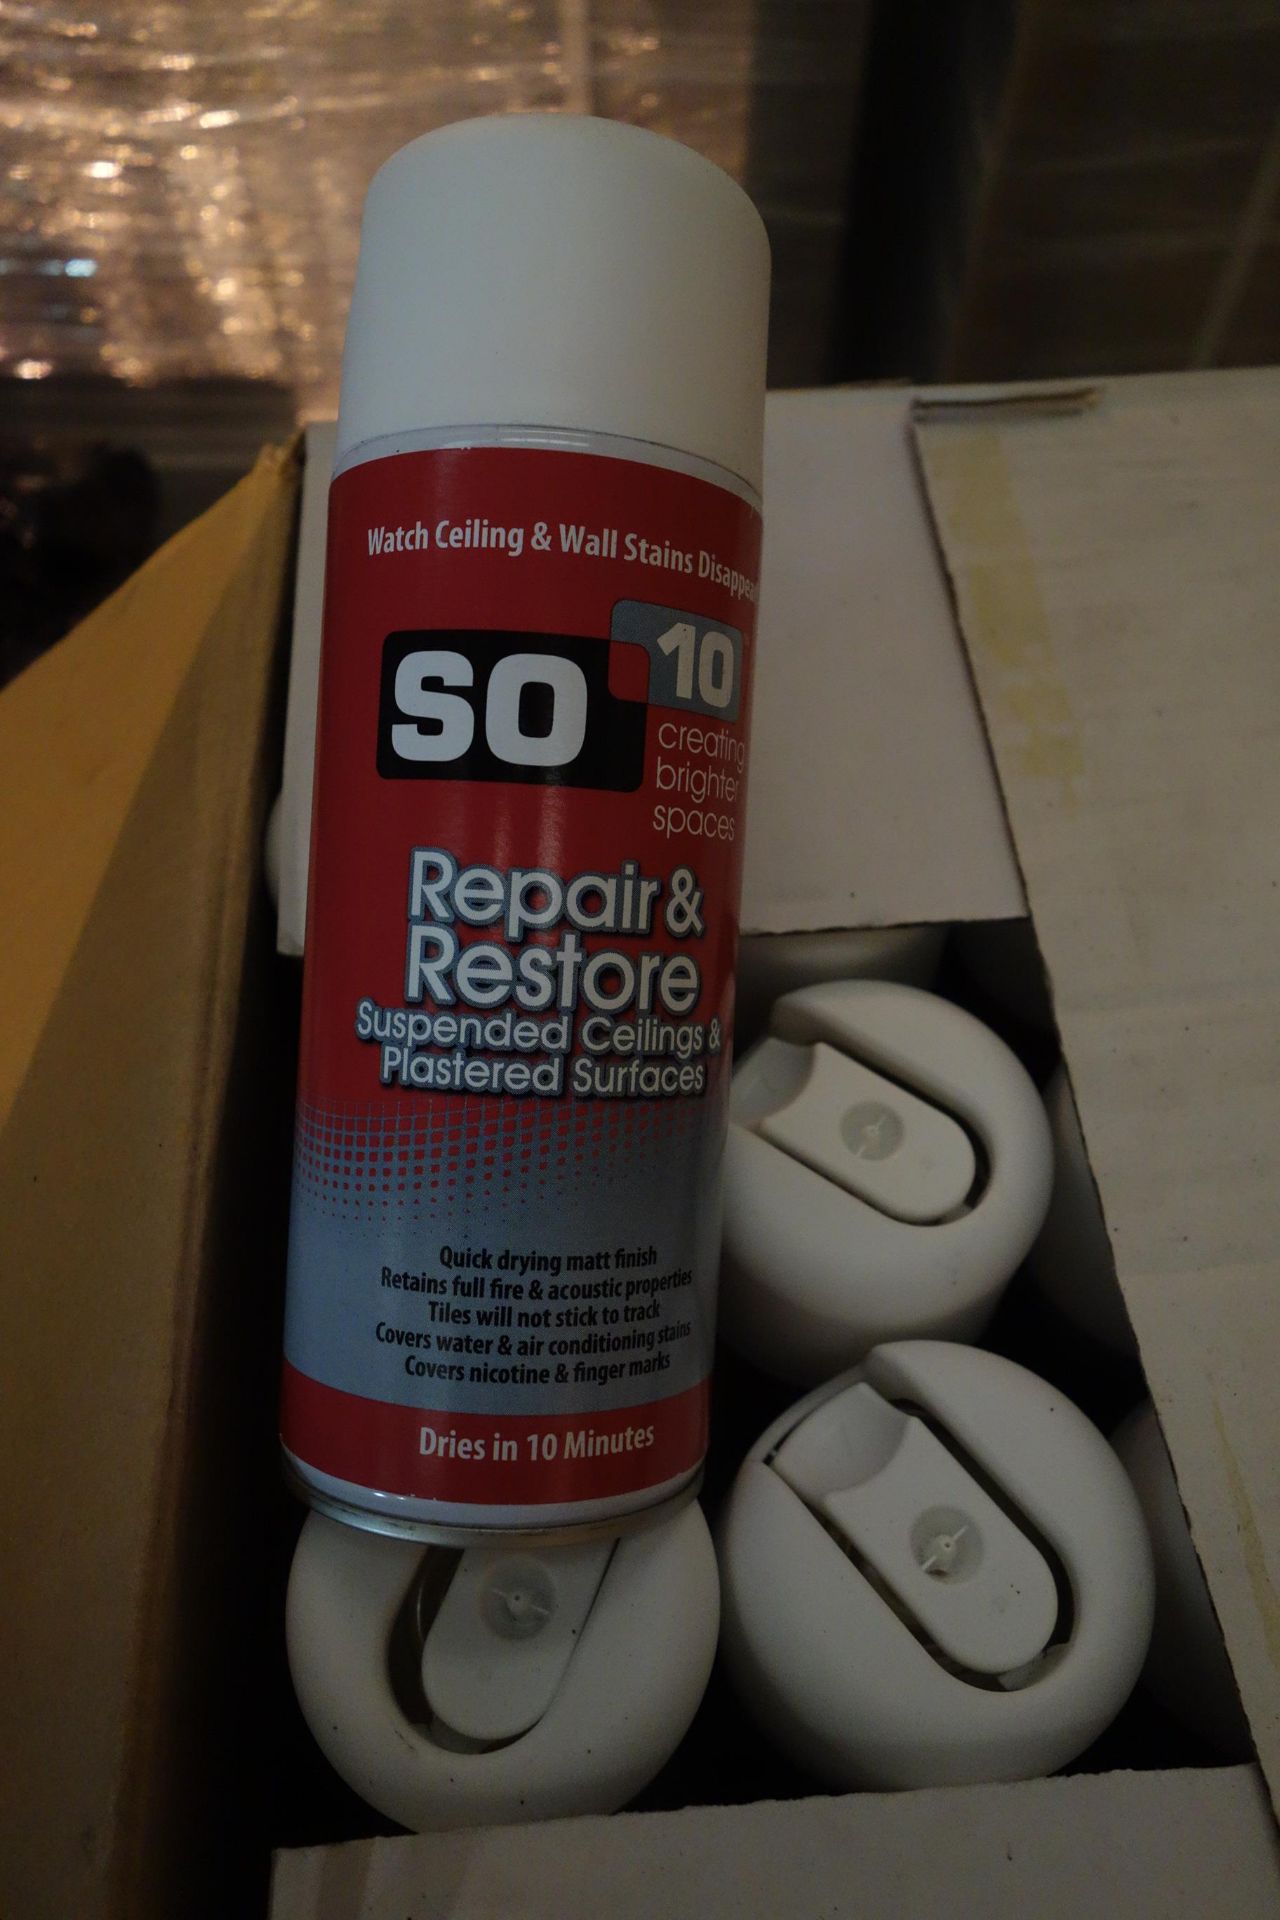 96 X Cans Of Solo Repair + Restore For Suspended Ceilings + Plastered Sufaces Watch Ceiling + Wall